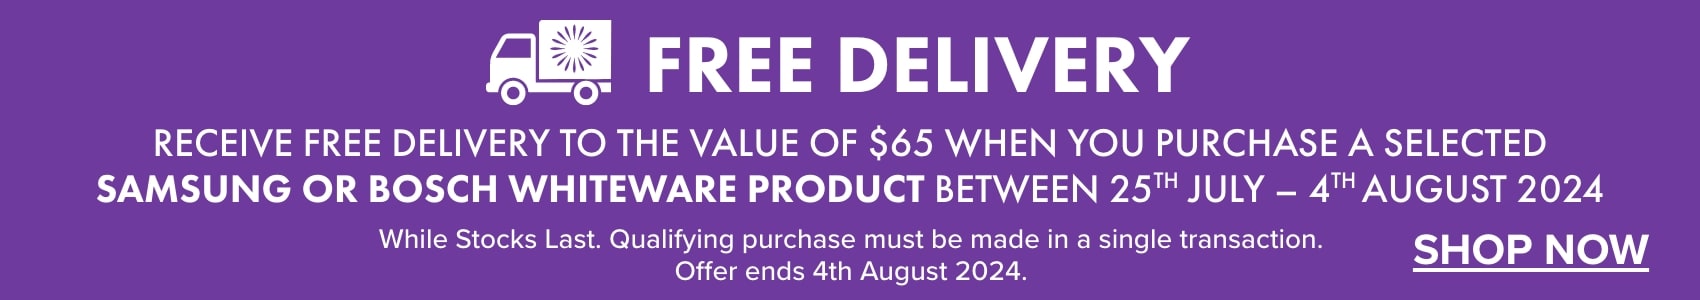 Receive FREE DELIVERY to the value of $65 when you purchase a selected Samsung or Bosch Whiteware product between 25th July - 4th August 2024